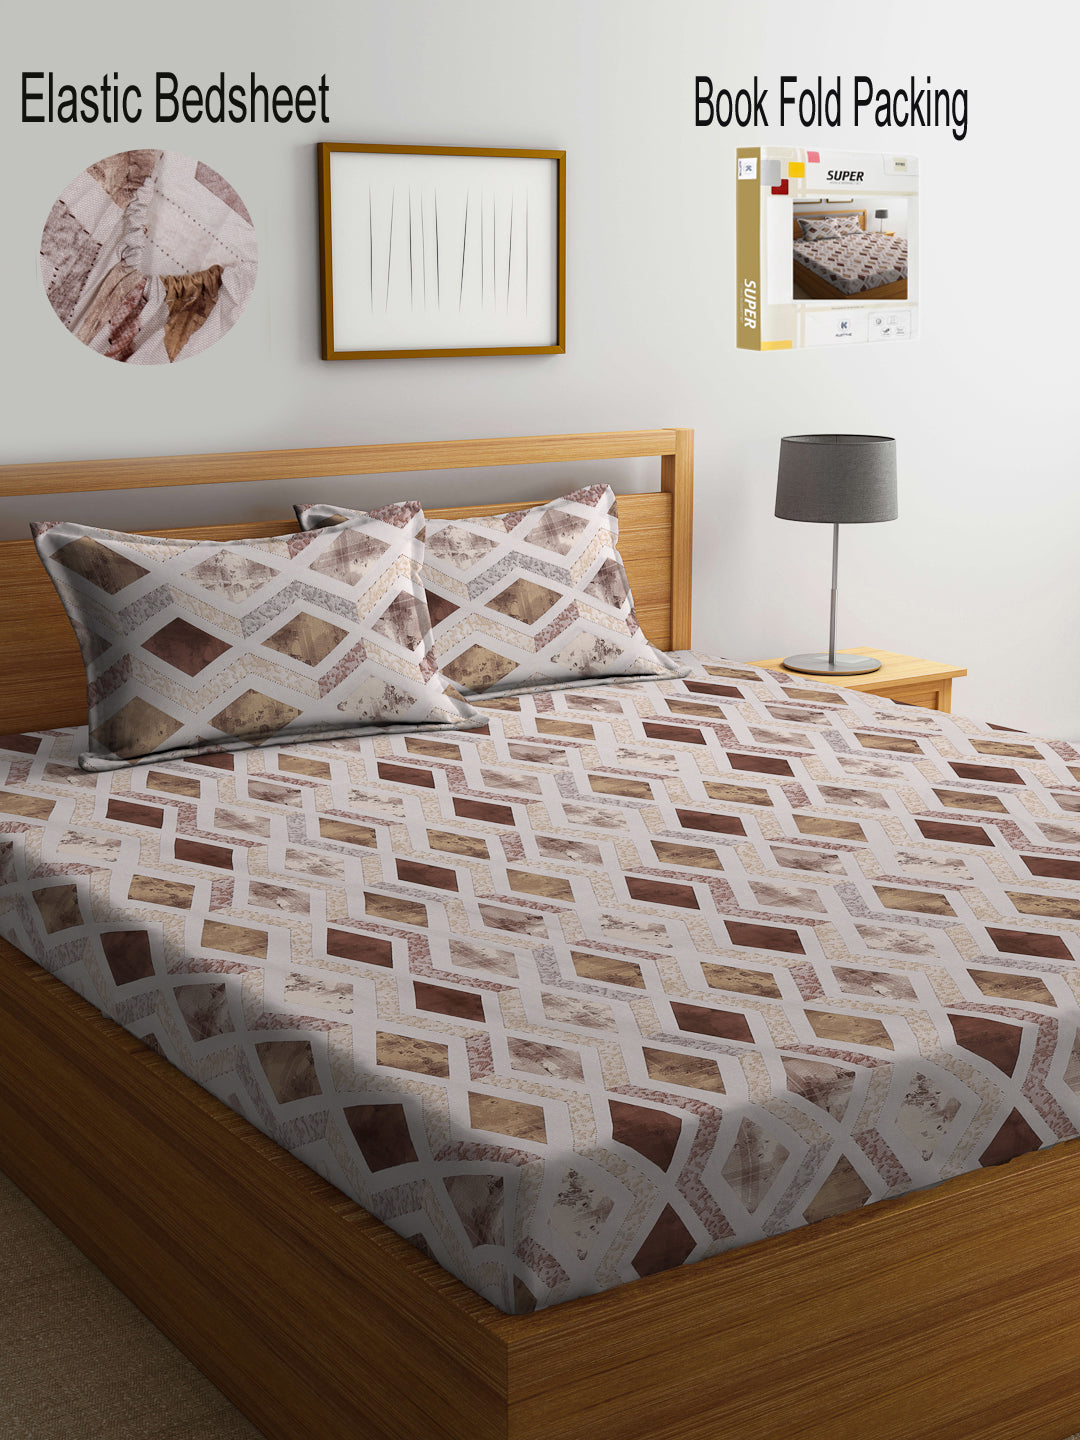 Klotthe Multicolor Geometric 400 TC Pure Cotton Fitted Double Bedsheet Set in Book Fold Packing